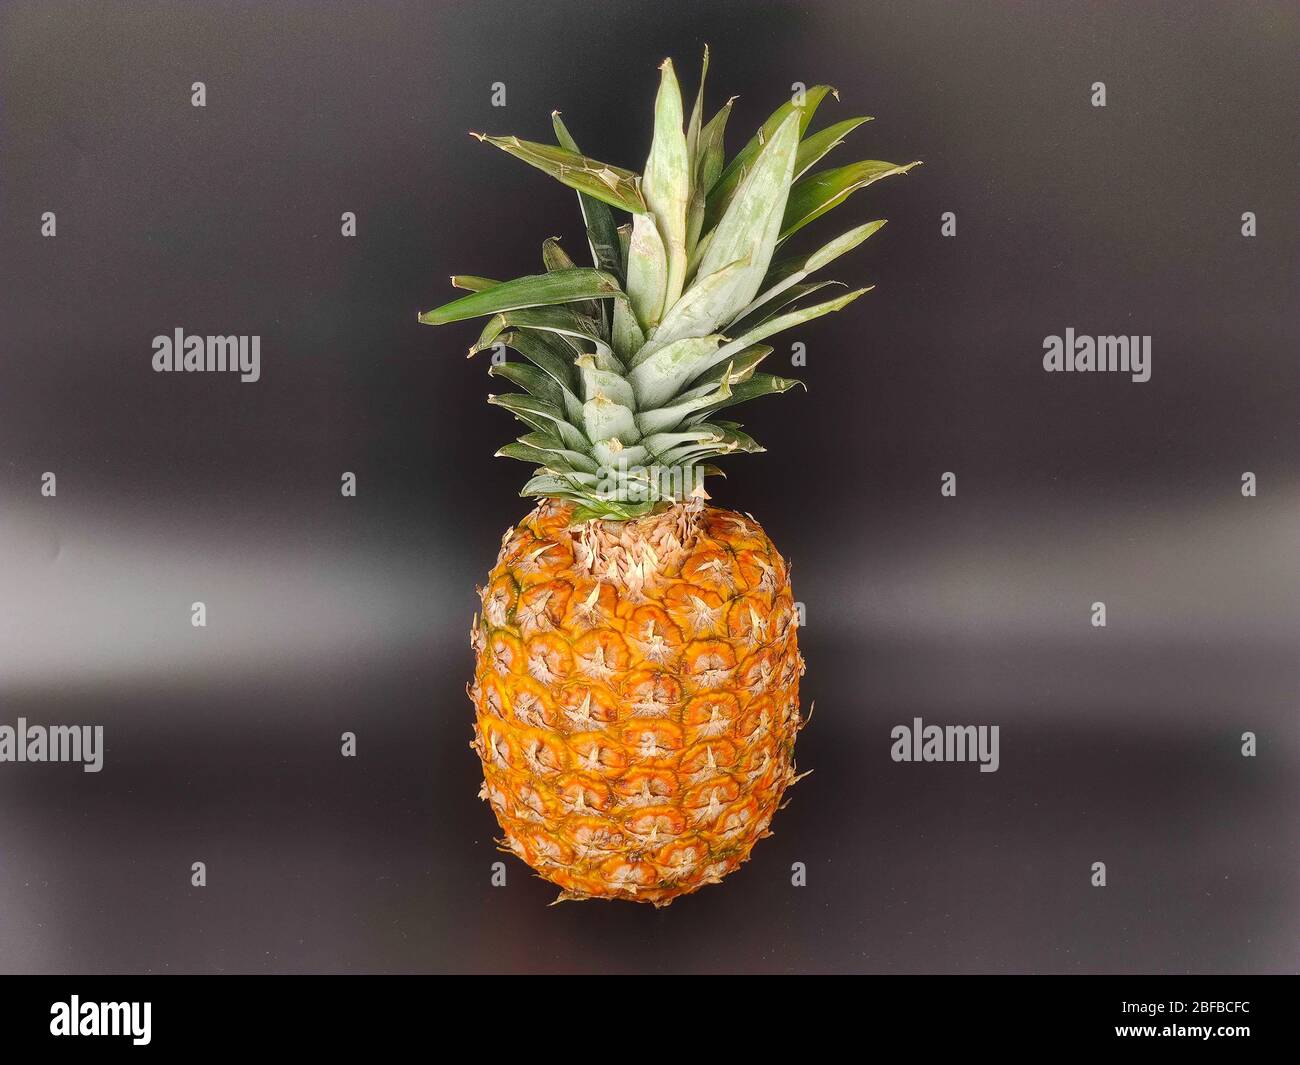 A whole pineapple on black. Vegetarian and healthy food. Nutrition and diet background Stock photo Stock Photo